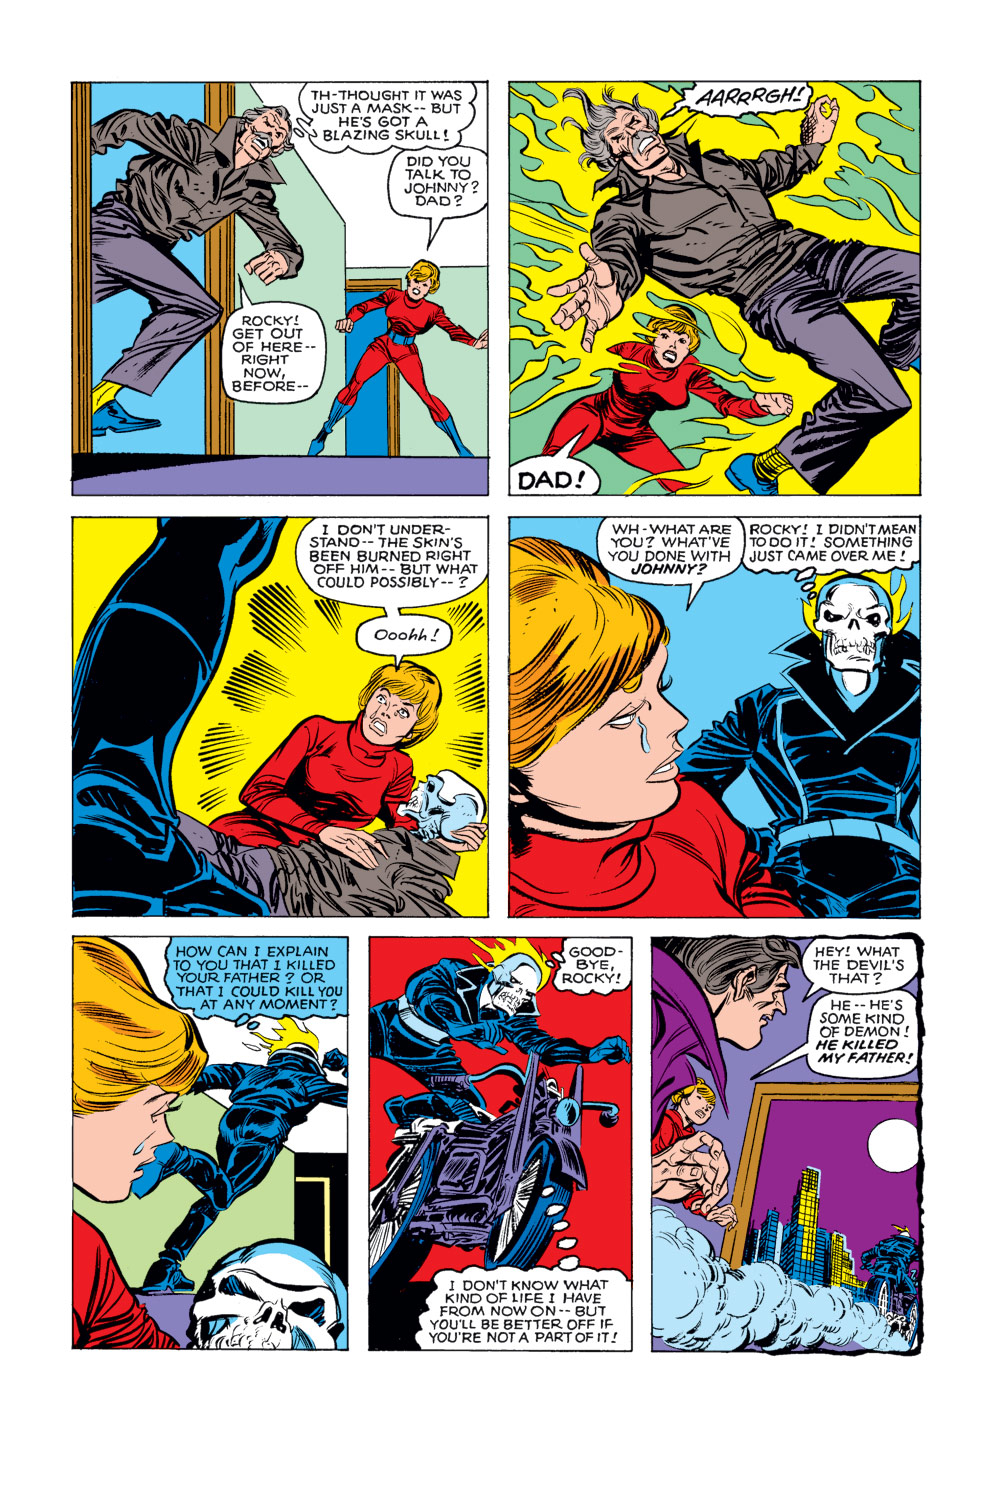 What If? (1977) issue 17 - Ghost Rider, Spider-Woman and Captain Marvel were villains - Page 8